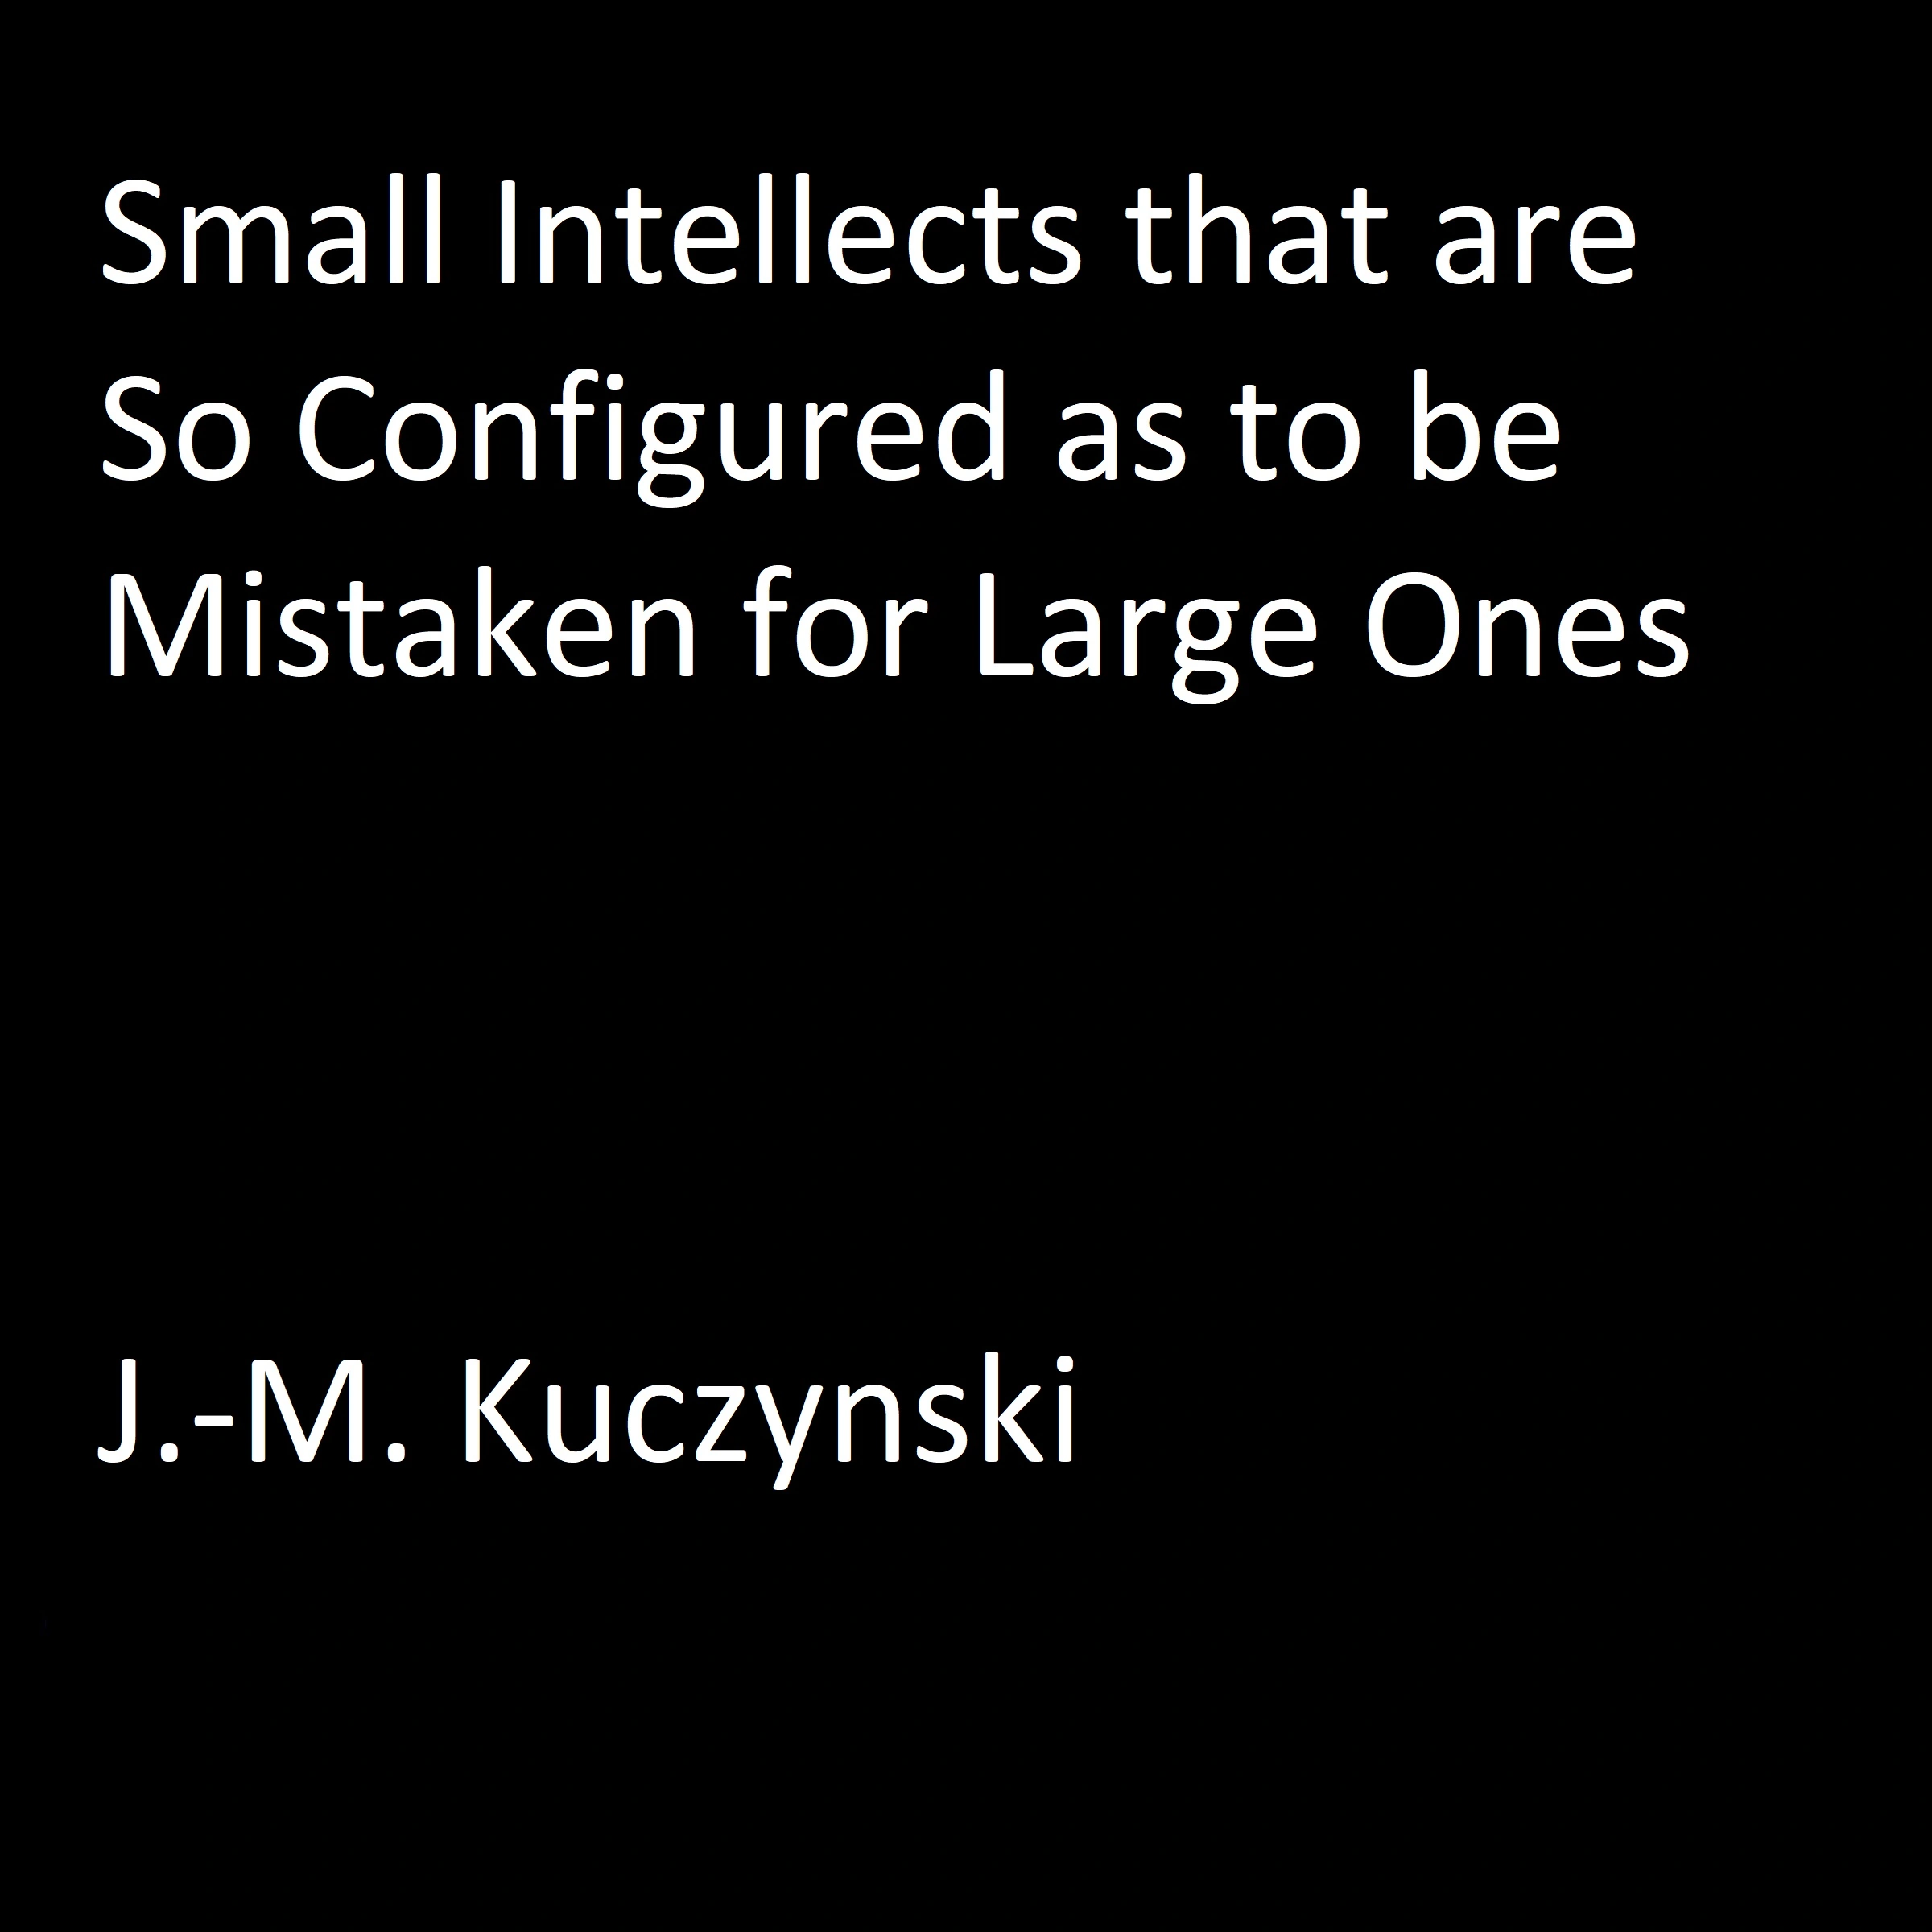 Small Intellects that are So Configured as to be Mistaken for Large Ones Audiobook by J.-M. Kuczynski